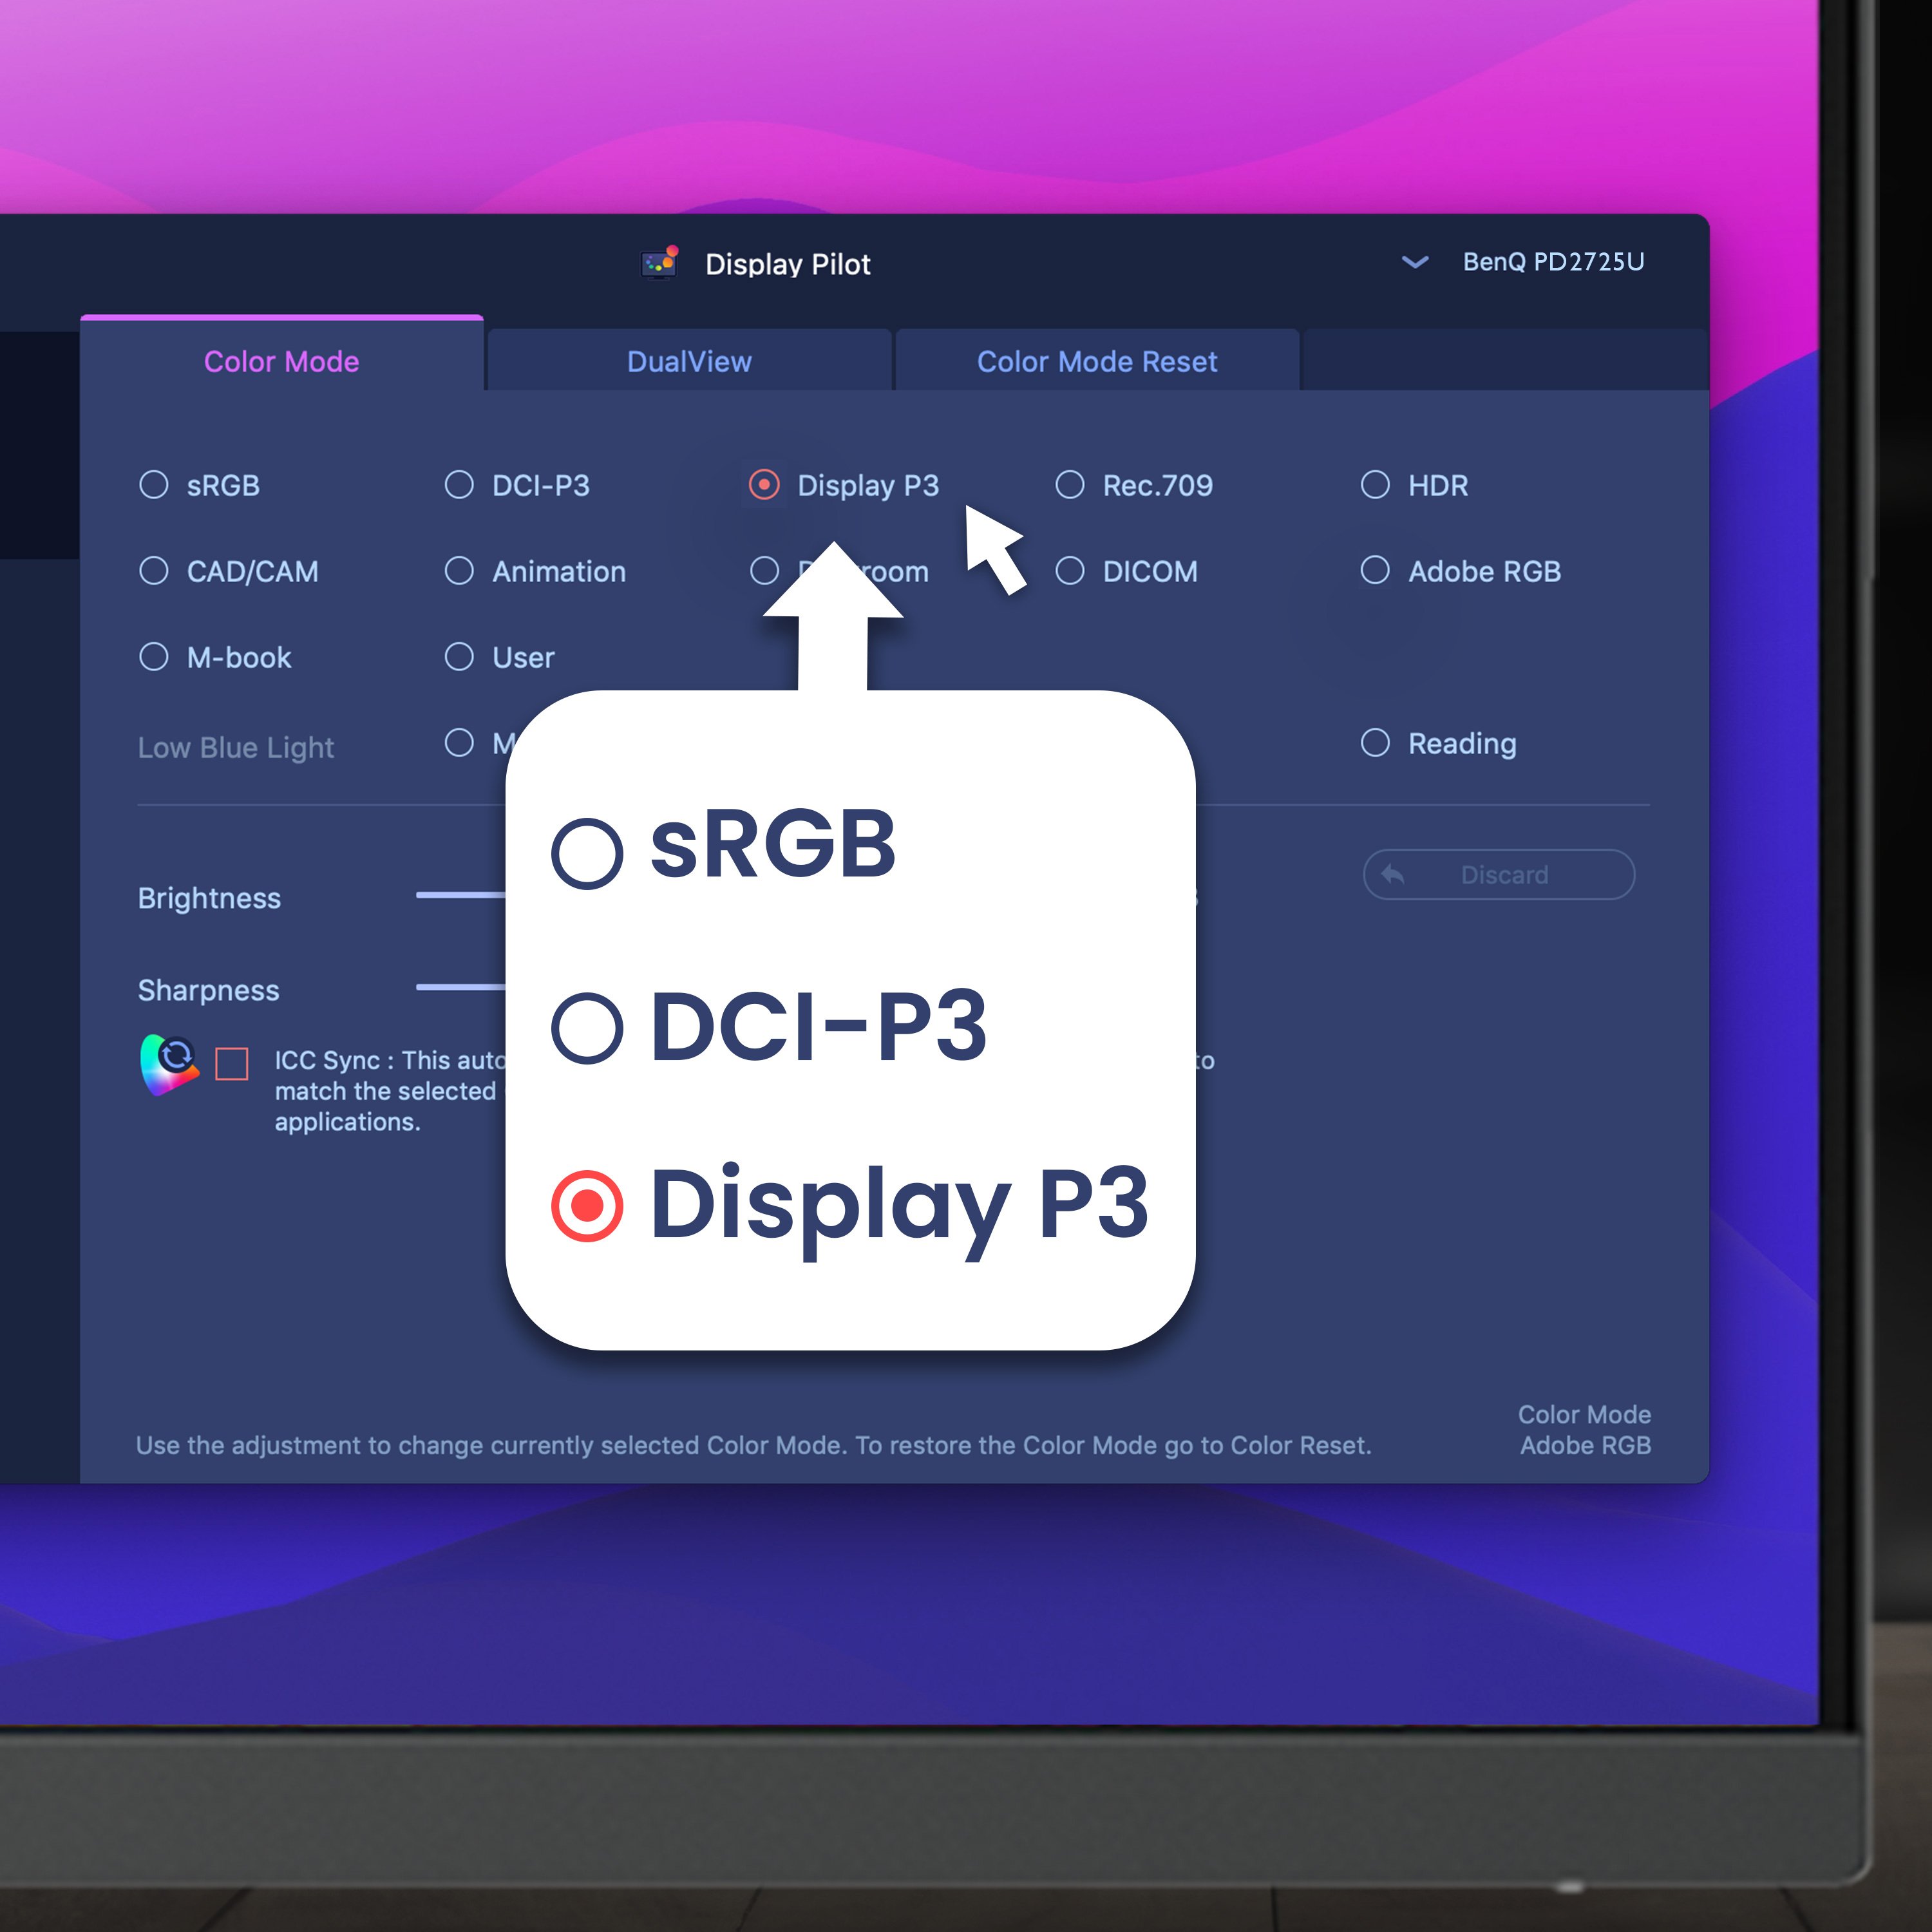 BenQ BenQ Display Pilot offers keyboard shortcuts to access OSD adjustments for different functions, including color mode switching and more.